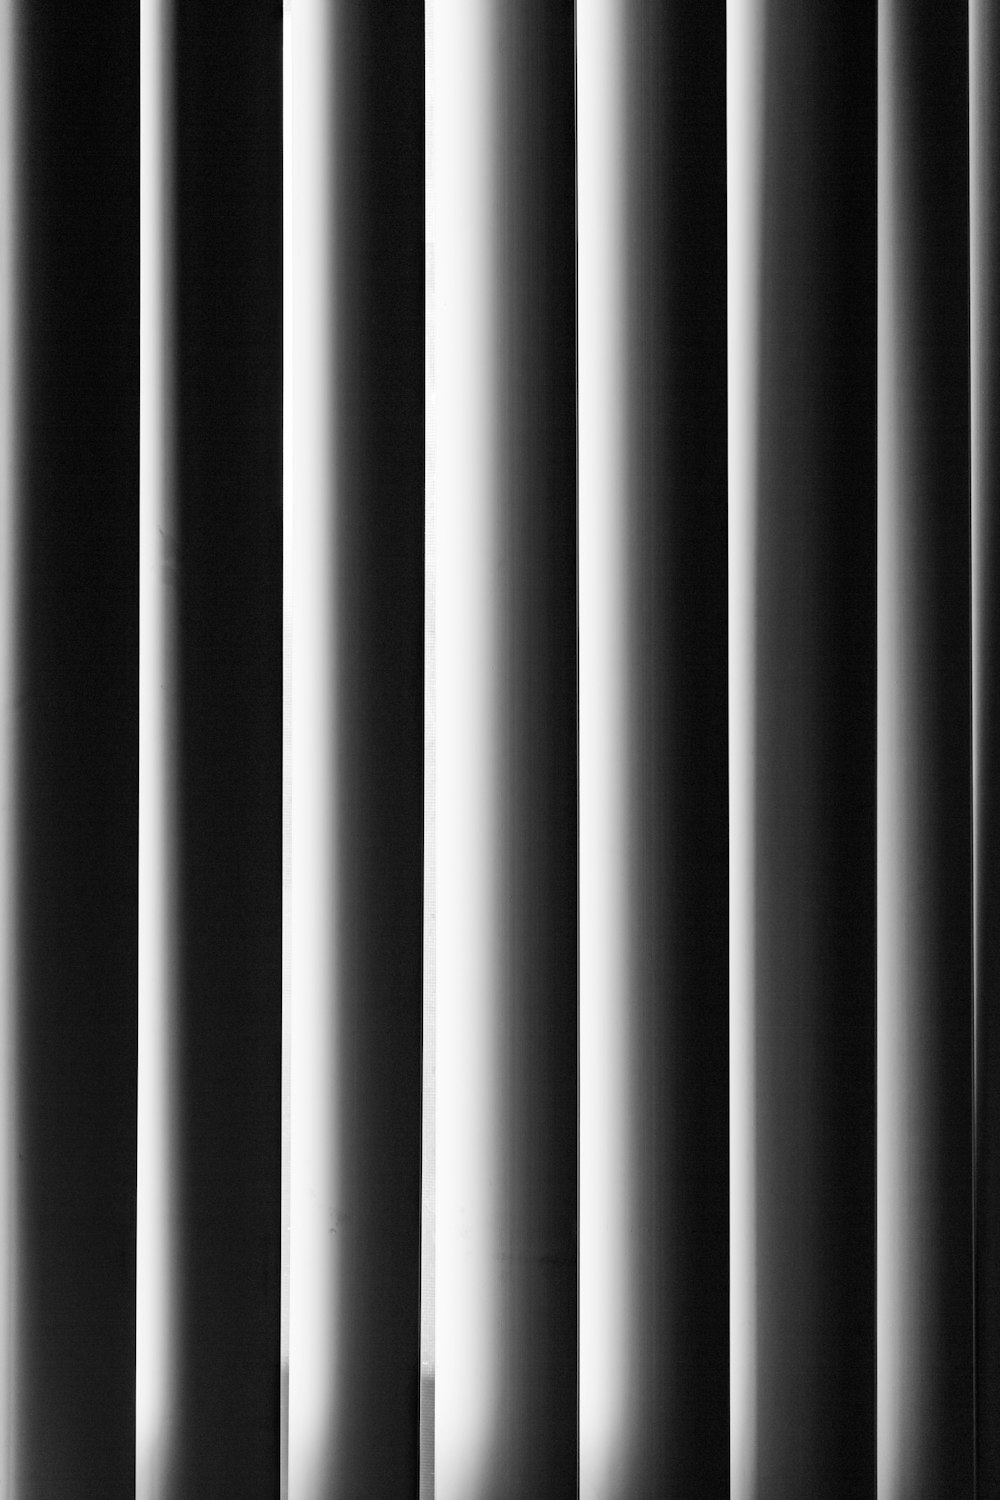 a black and white photo of vertical blinds